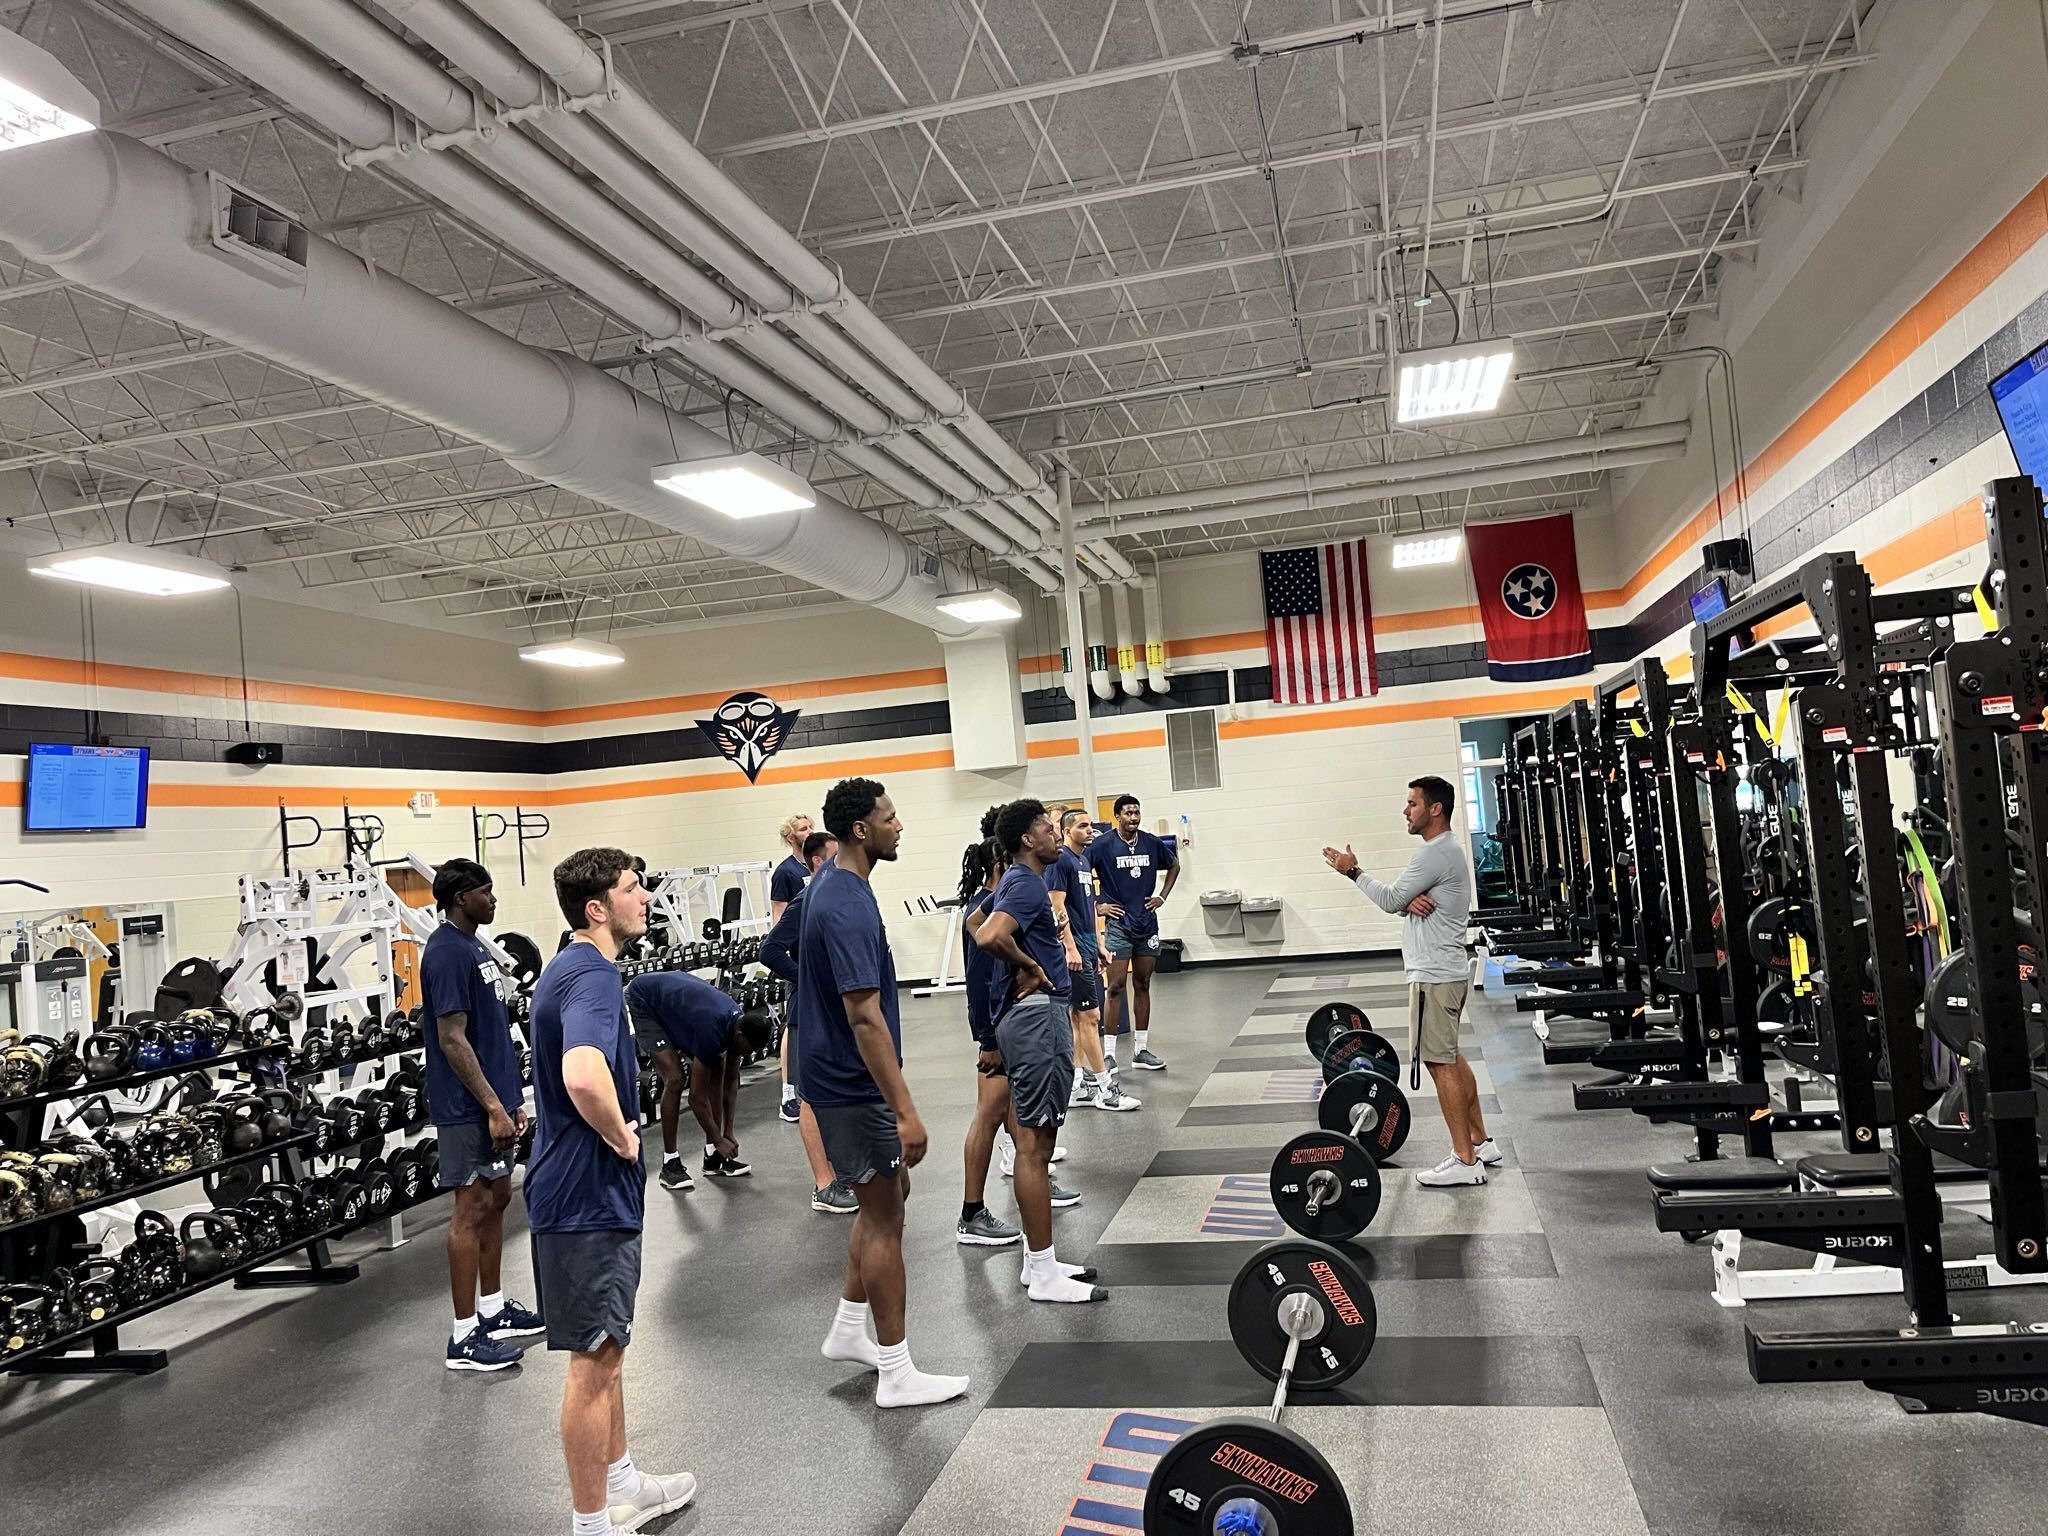 Ut Martin Basketball We Re Back Great Morning In The Weight Room To Start The Day T Co P98p4ih465 Twitter